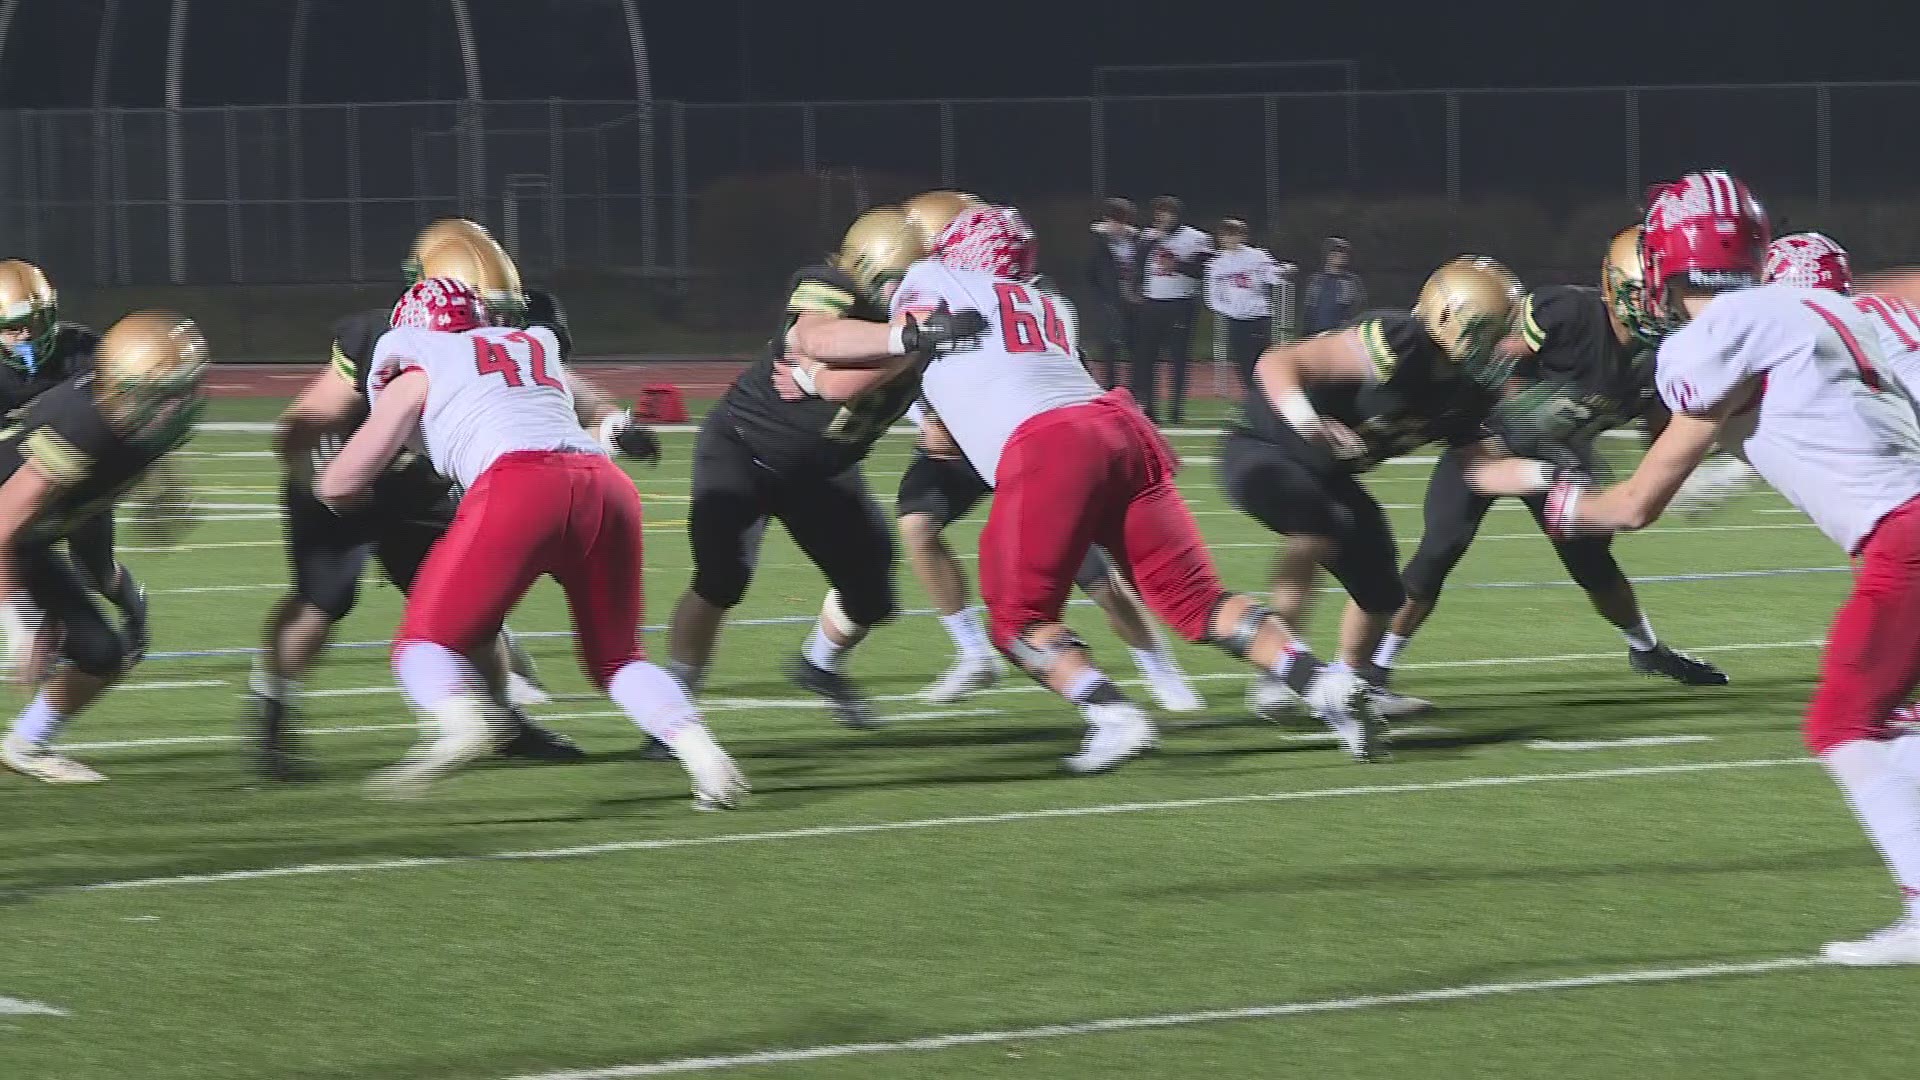 Highlights of No. 2 Jesuit's 56-9 win over Oregon City. Highlights are part of Friday Night Flights with Orlando Sanchez.